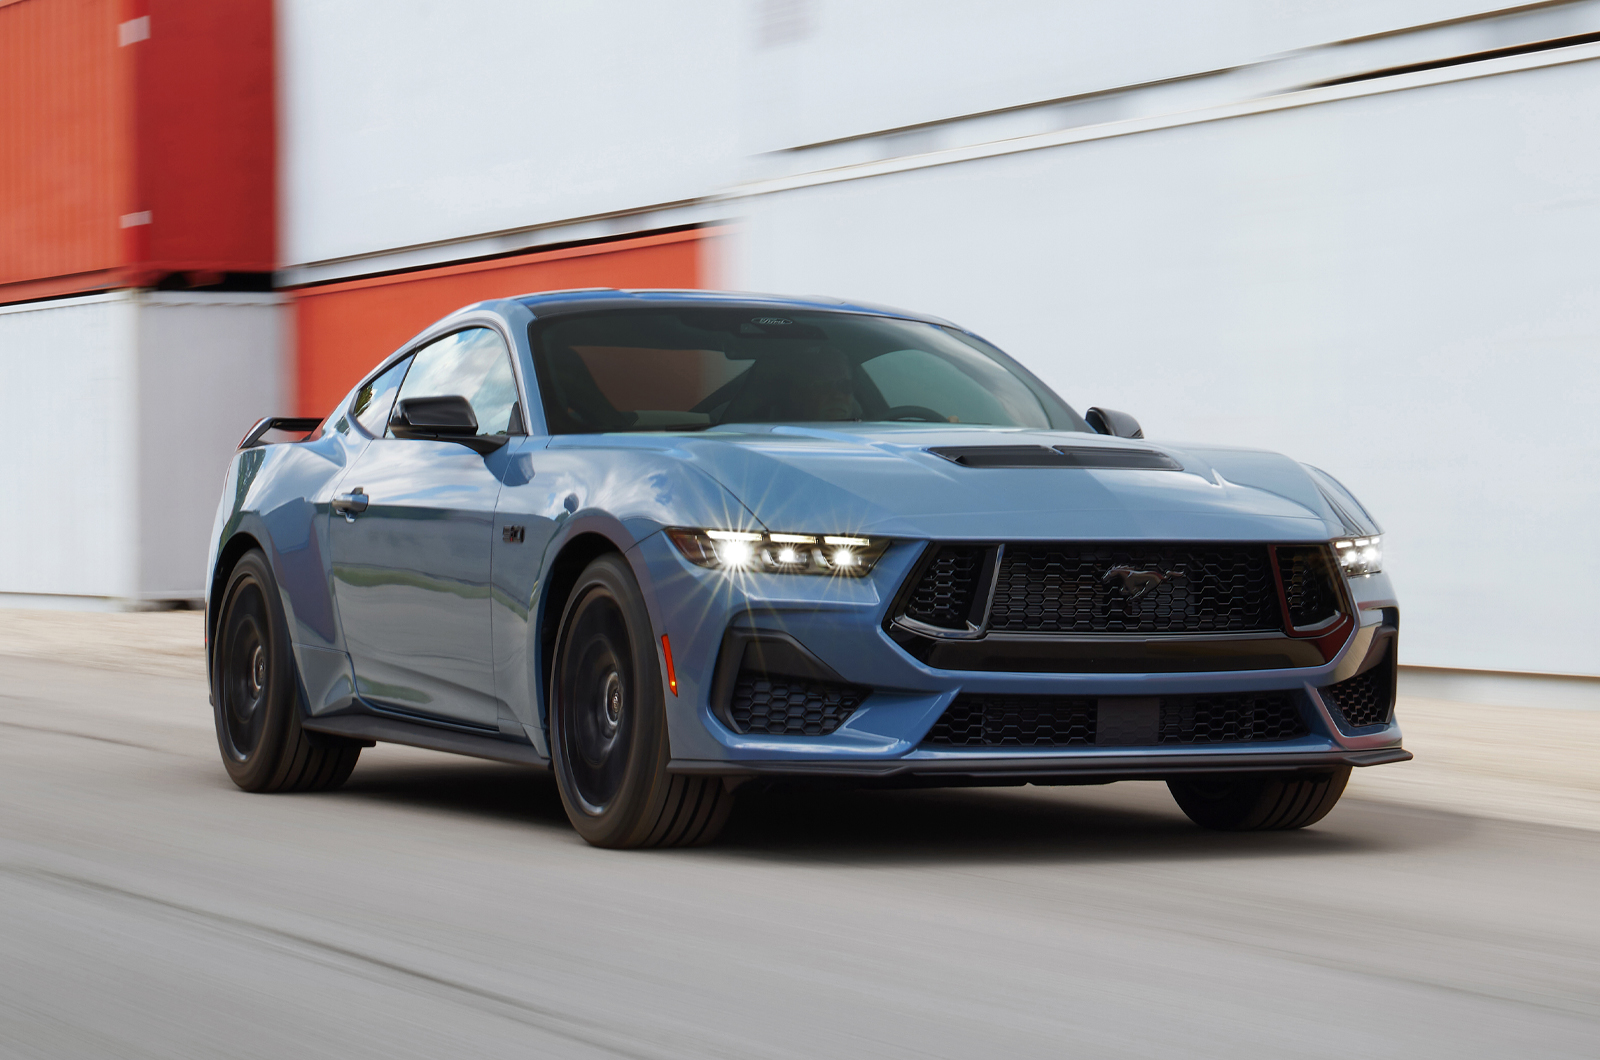 New 2023 Ford Mustang keeps V8 punch